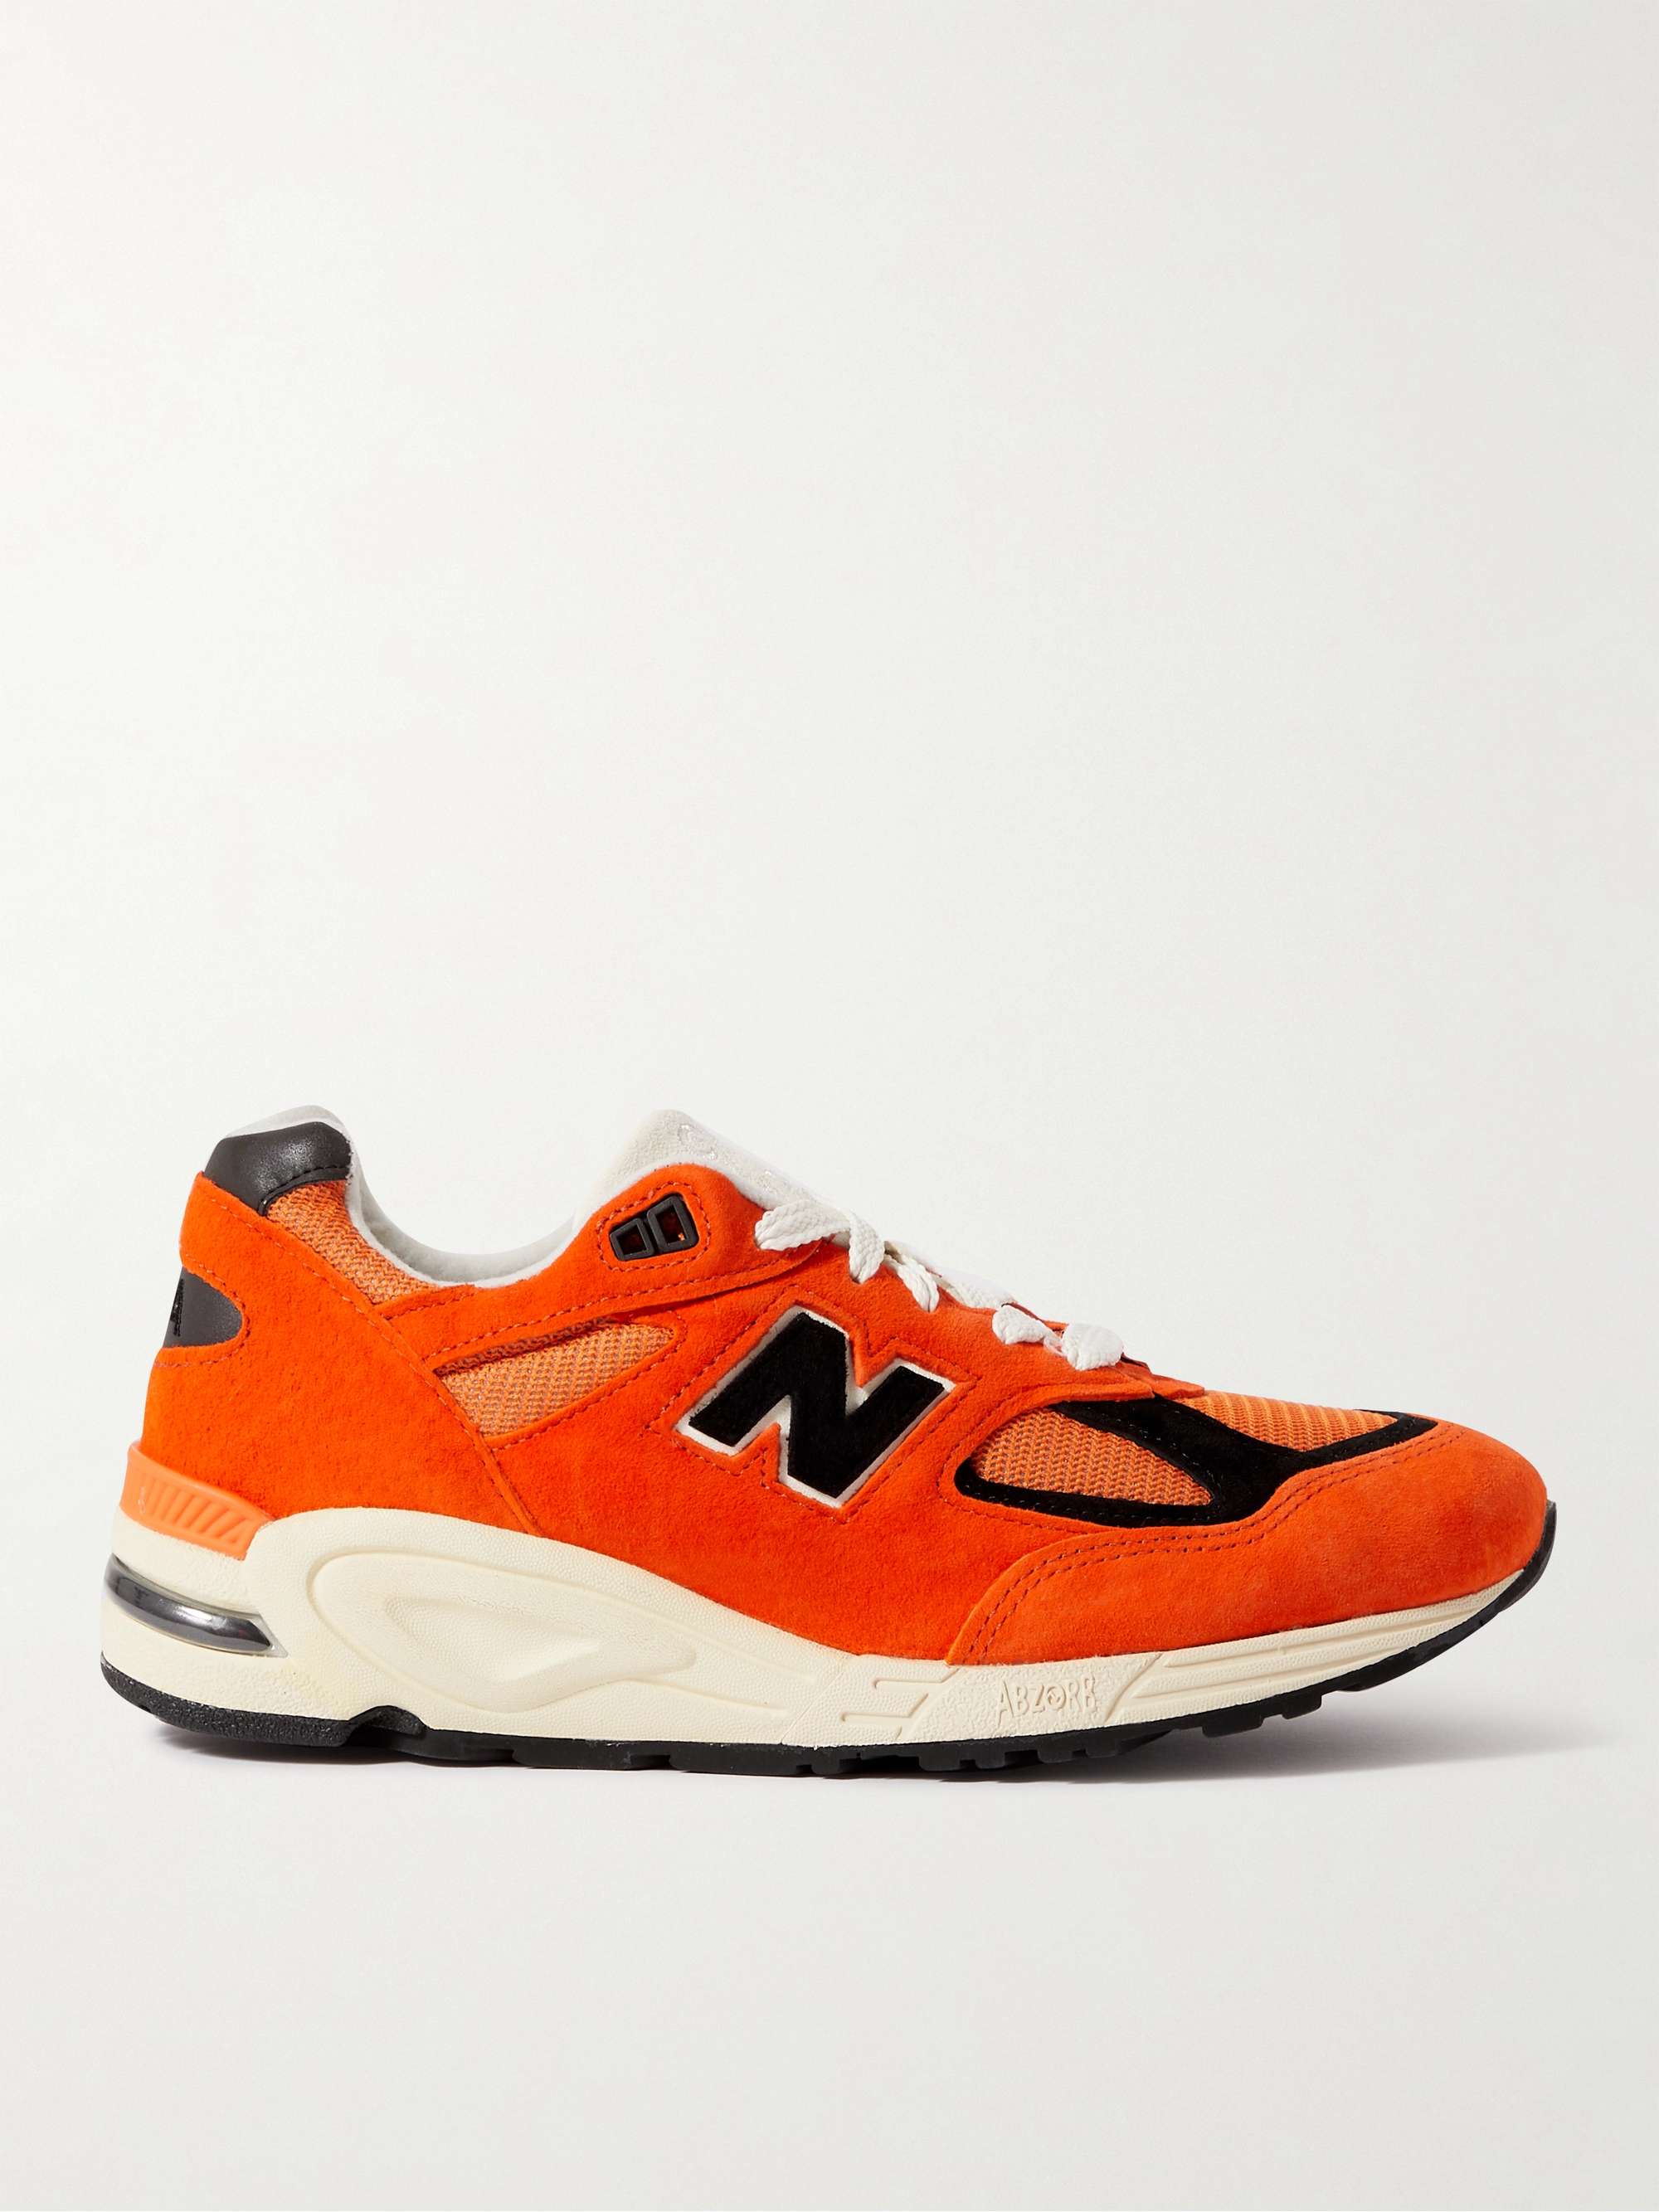 NEW BALANCE MADE in USA 990v2 Mesh and Suede Sneakers | MR PORTER